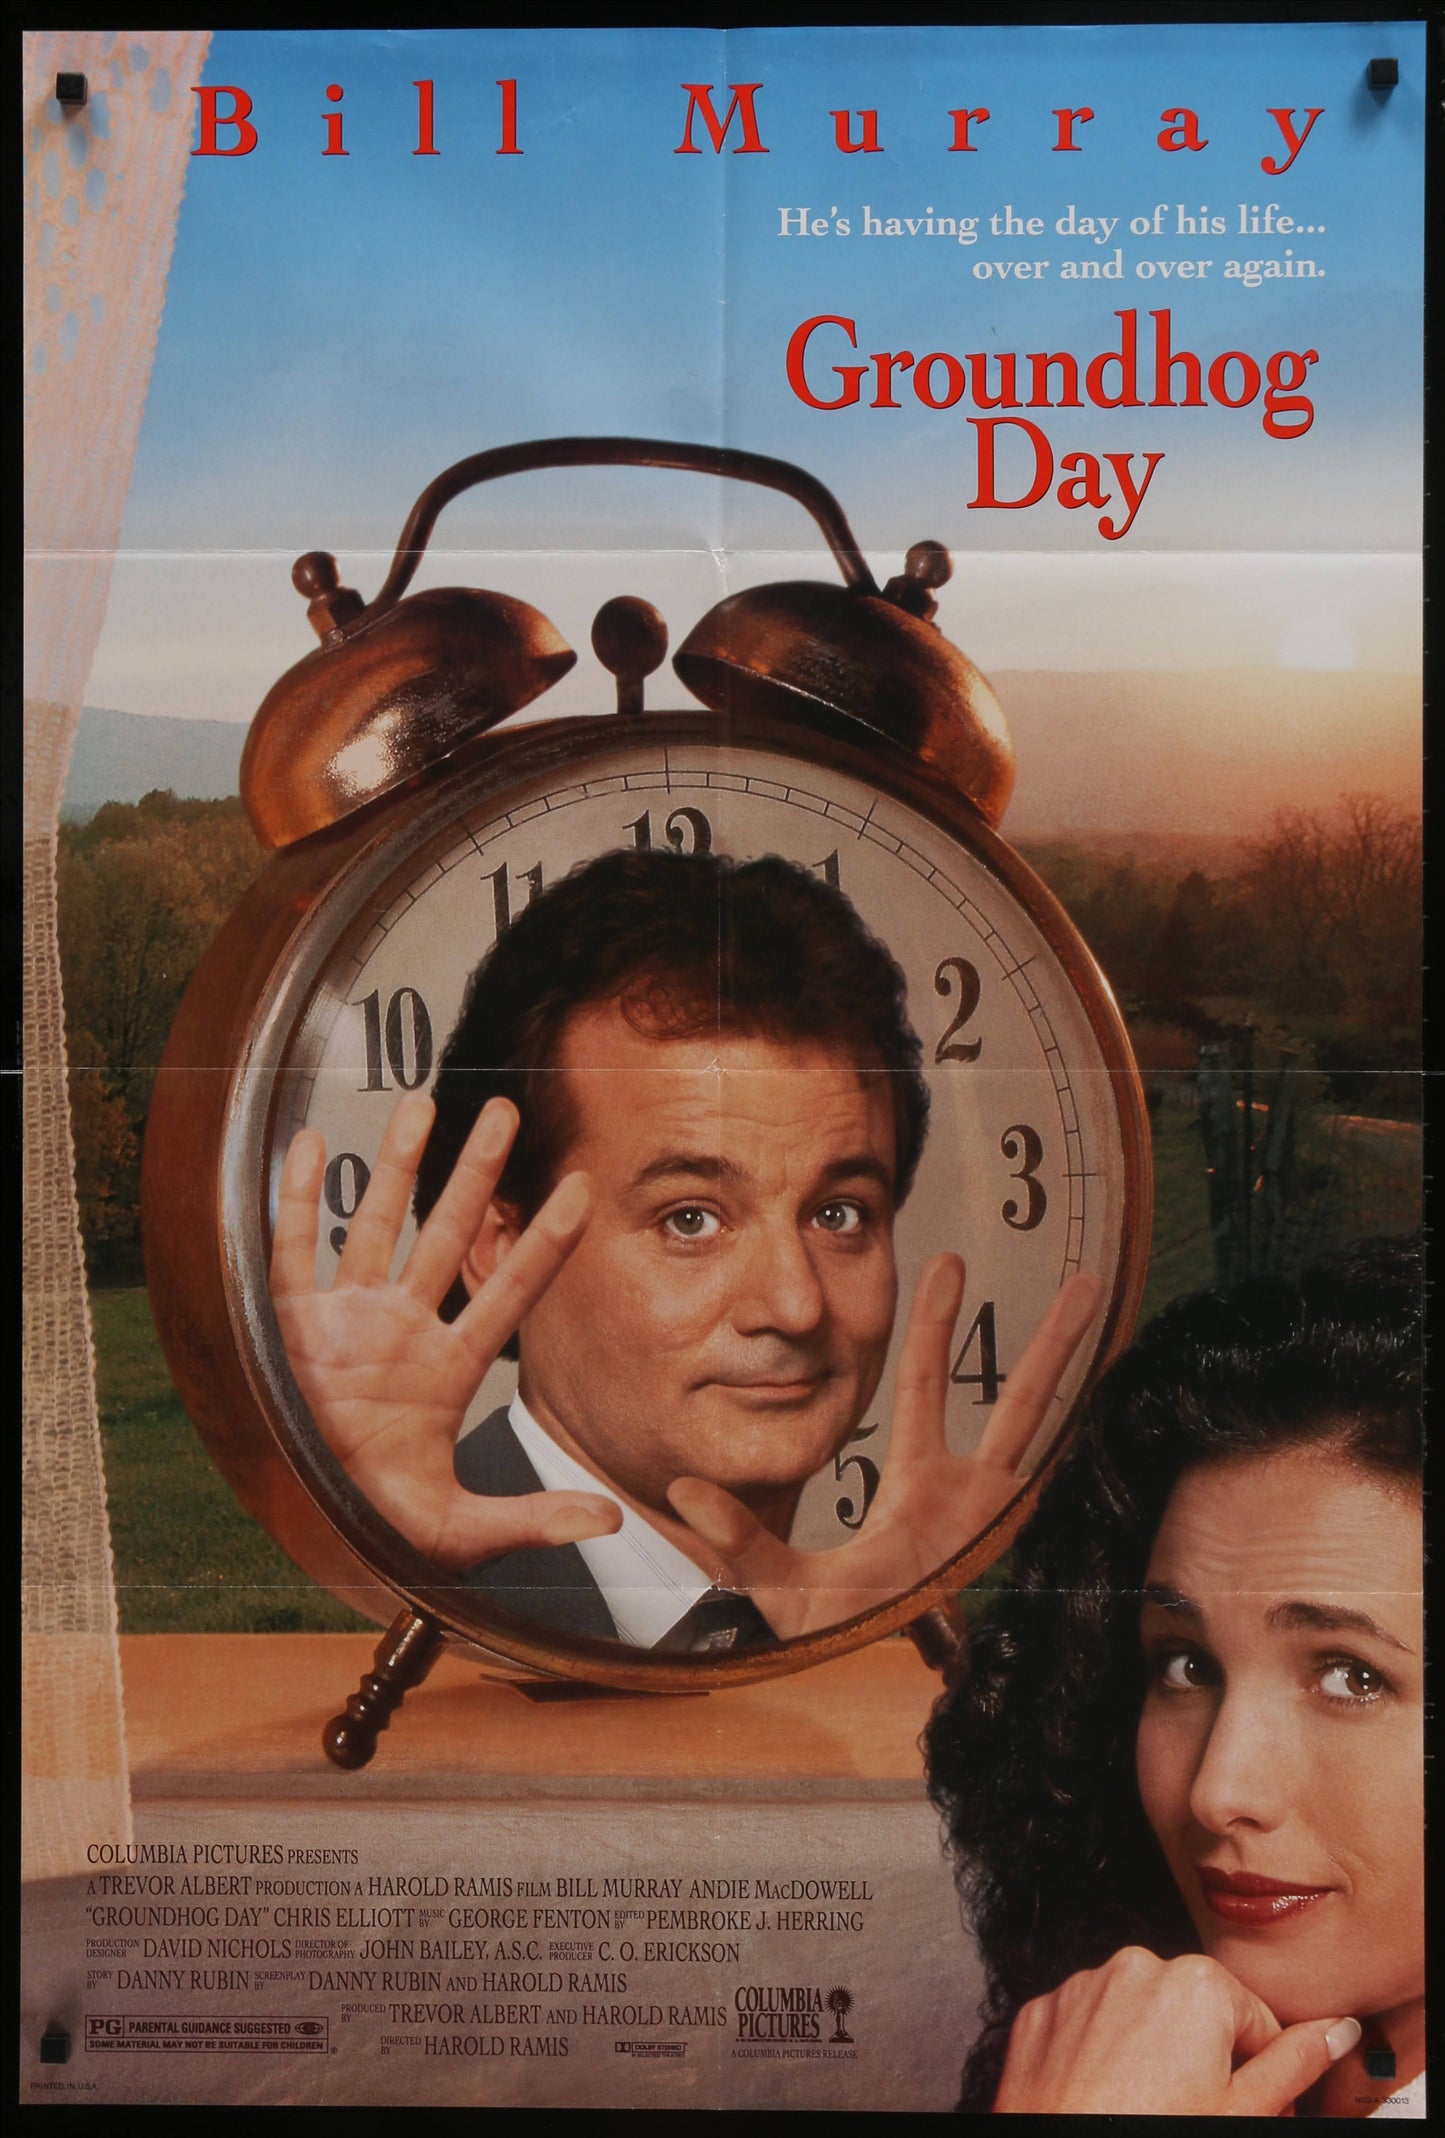 Groundhog Day US One Sheet (1993) - ORIGINAL RELEASE - posterpalace.com